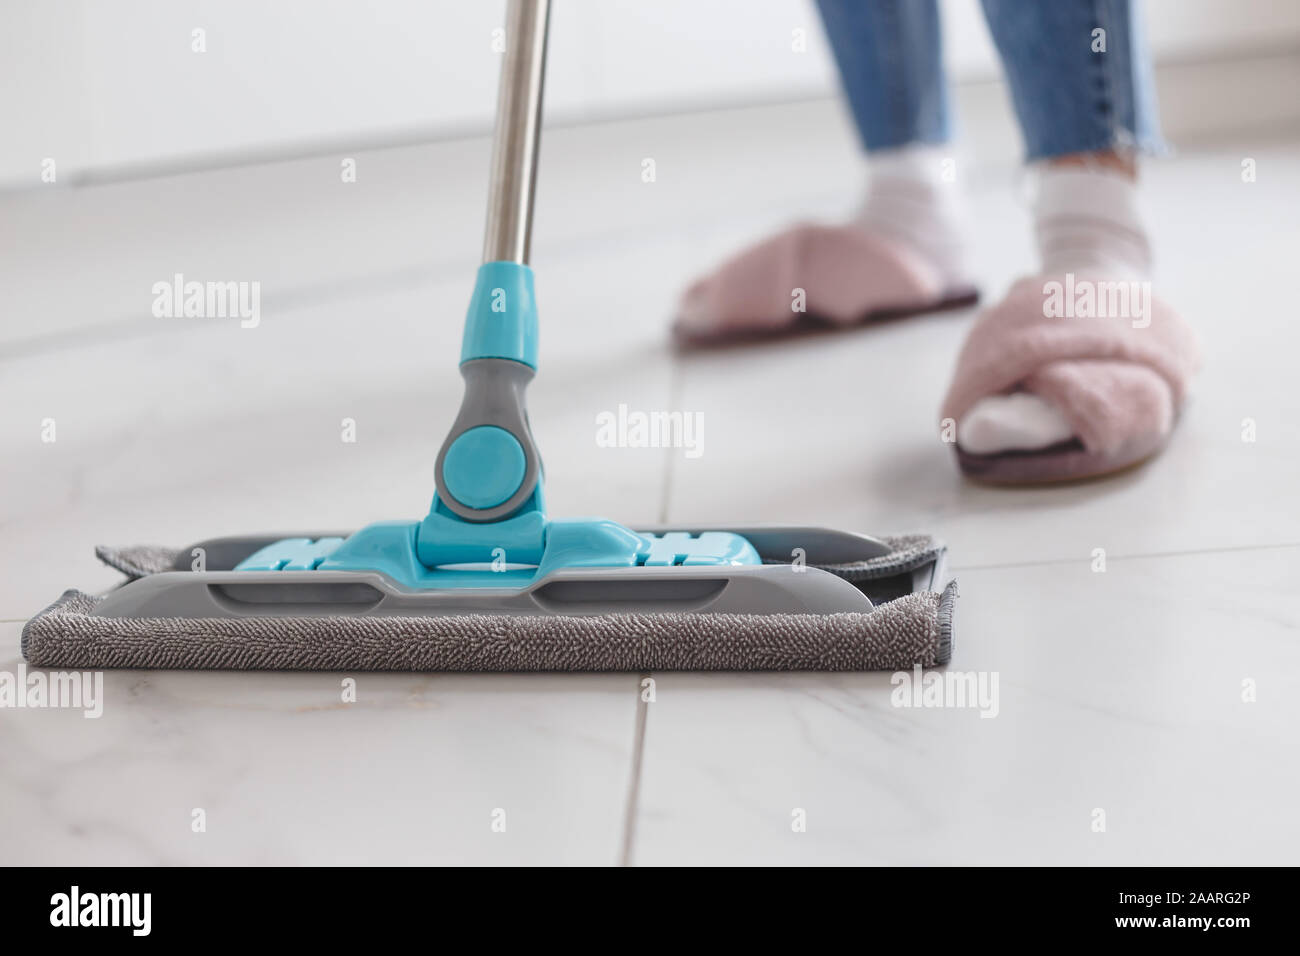 Housewife mopping floor made of porcelain tiles in the kitchen. Stock Photo